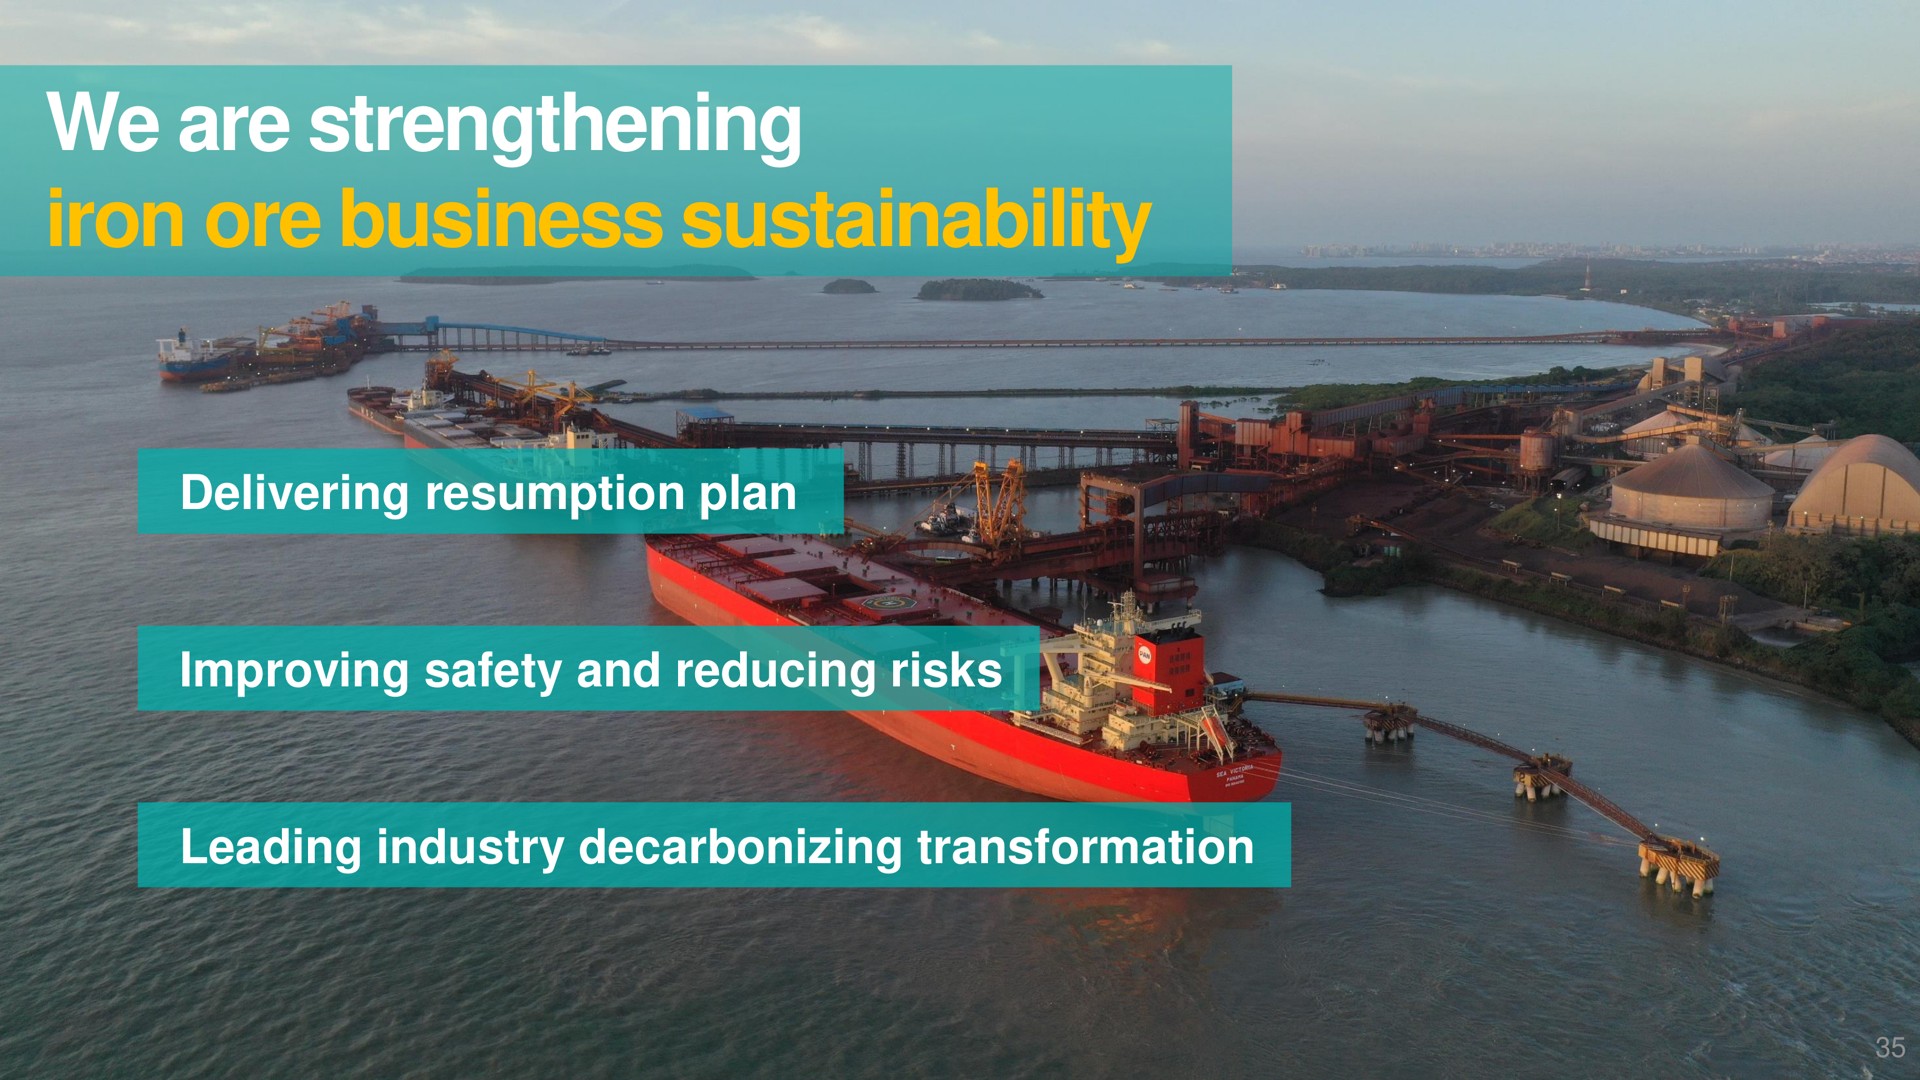 we are strengthening iron ore business improving safety and reducing risks a leading industry decarbonizing transformation | Vale